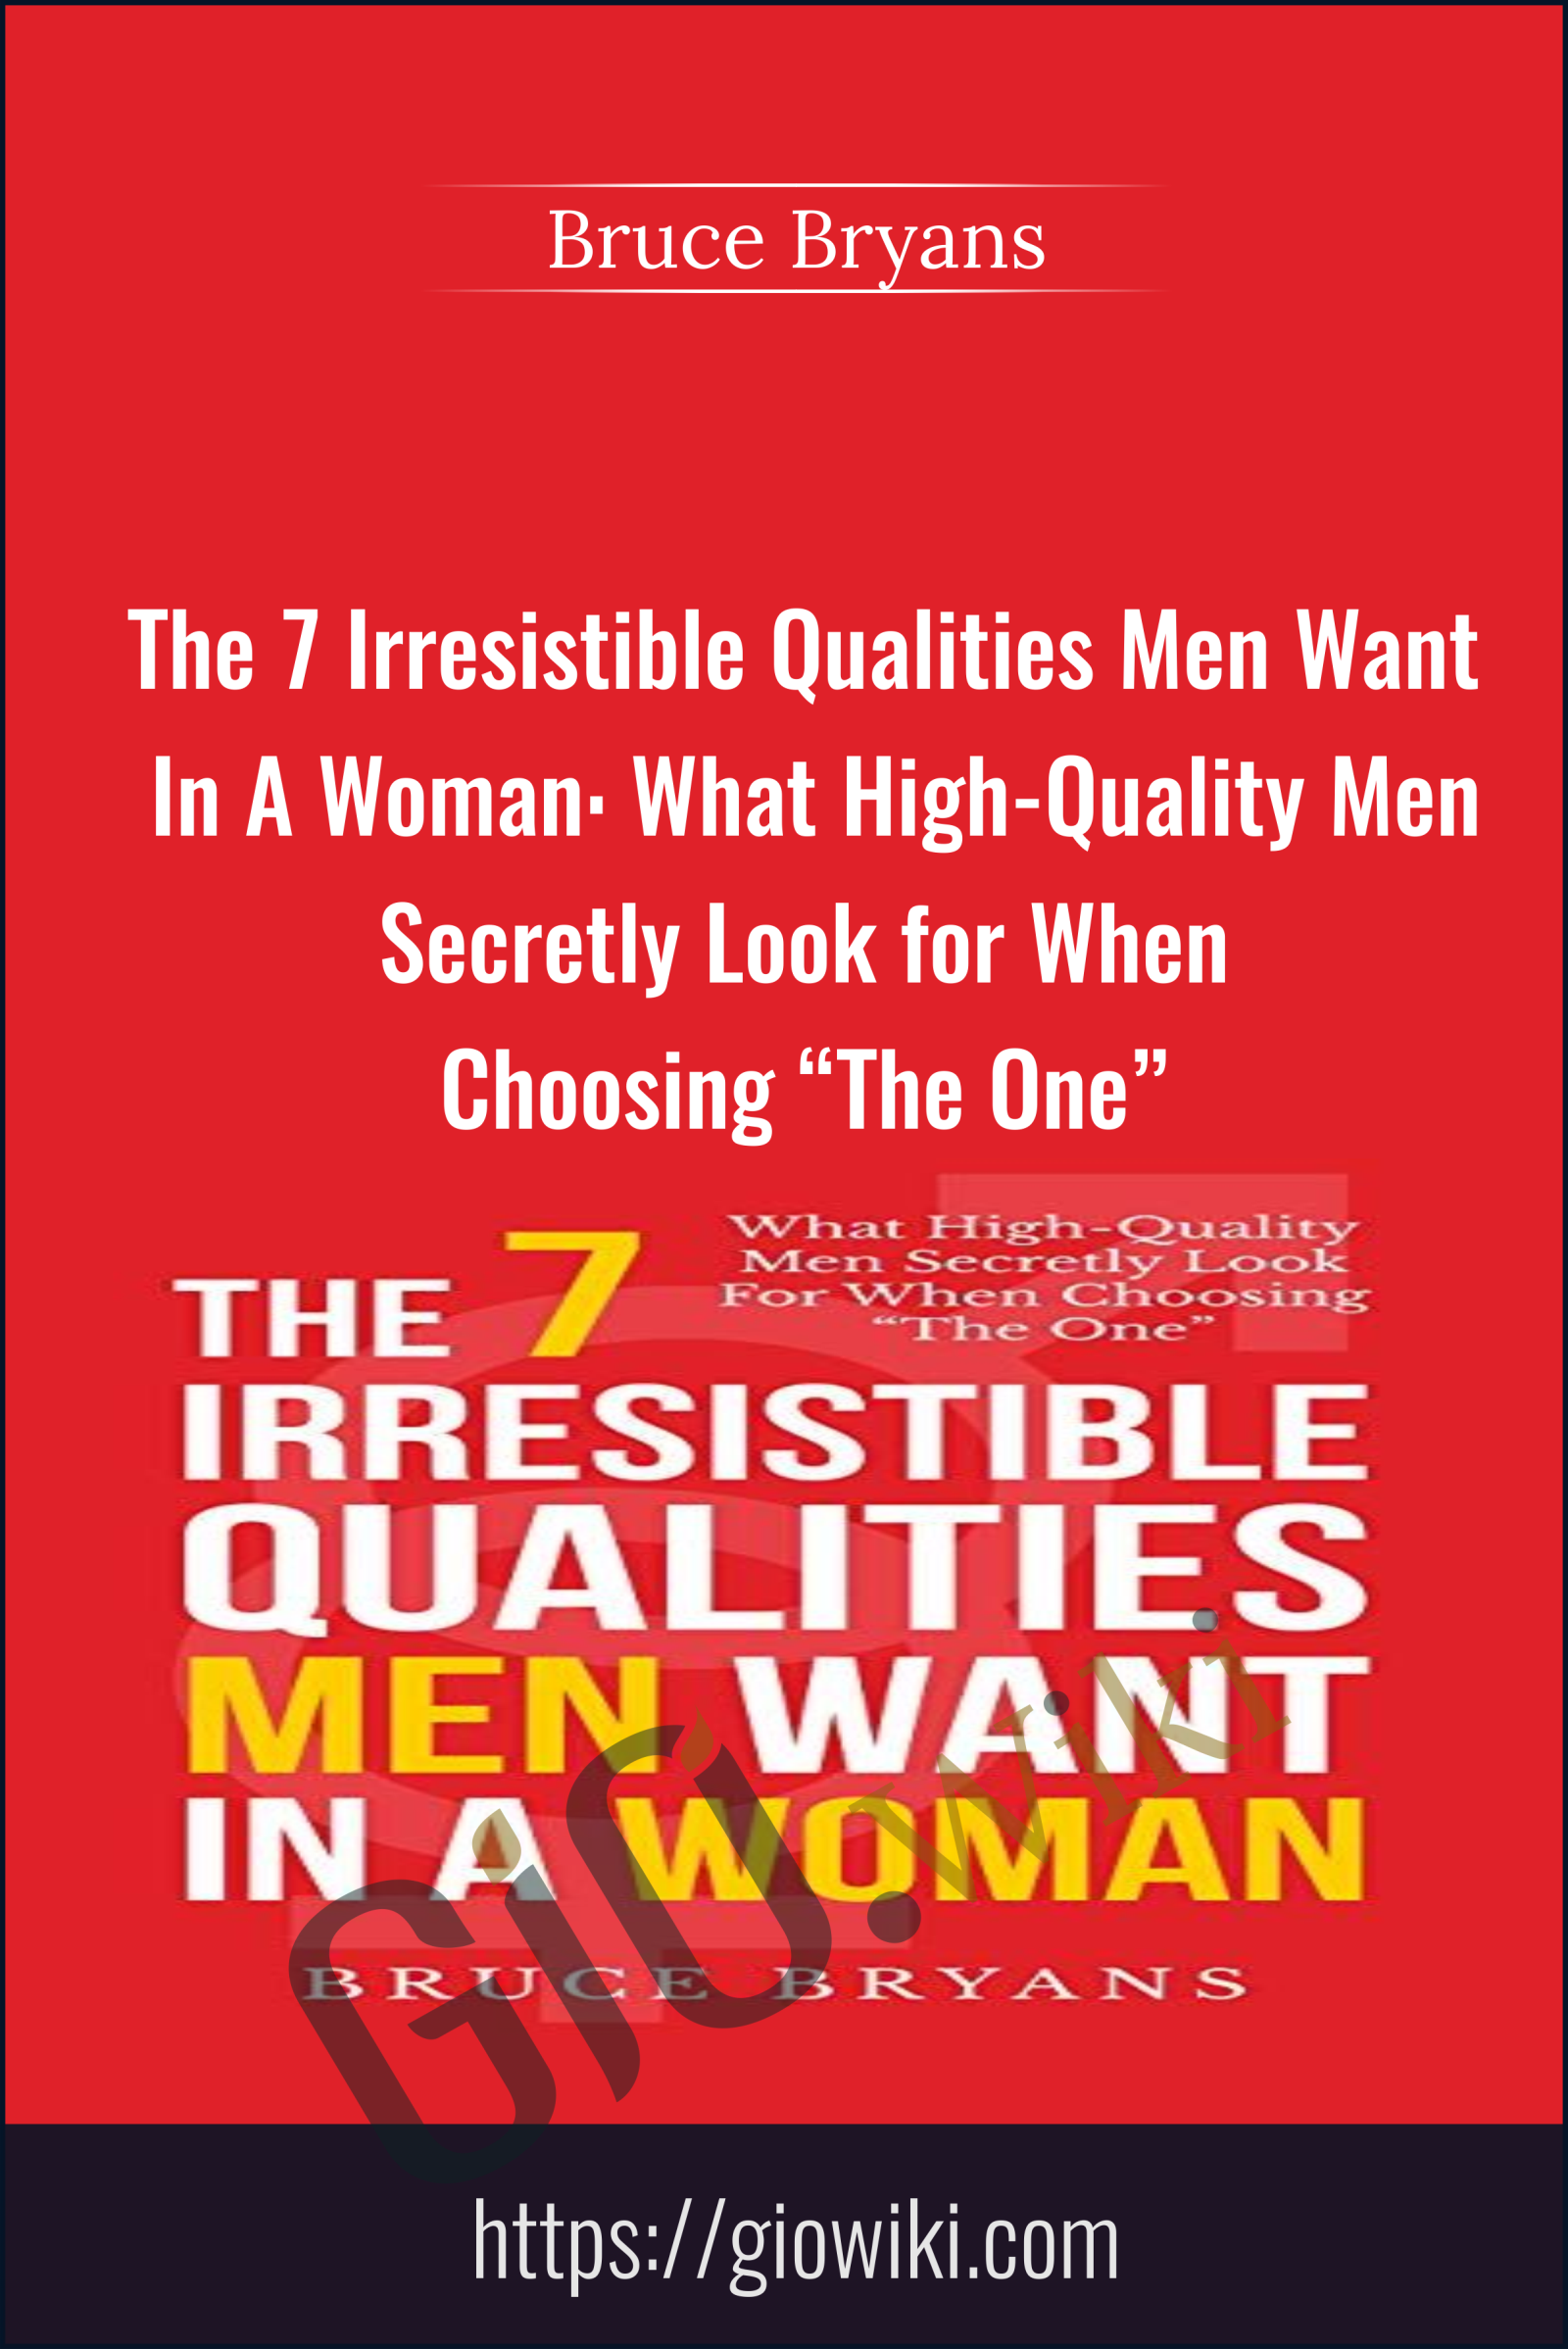 The 7 Irresistible Qualities Men Want In A Woman: What High-Quality Men Secretly Look for When Choosing “The One” - Bruce Bryans